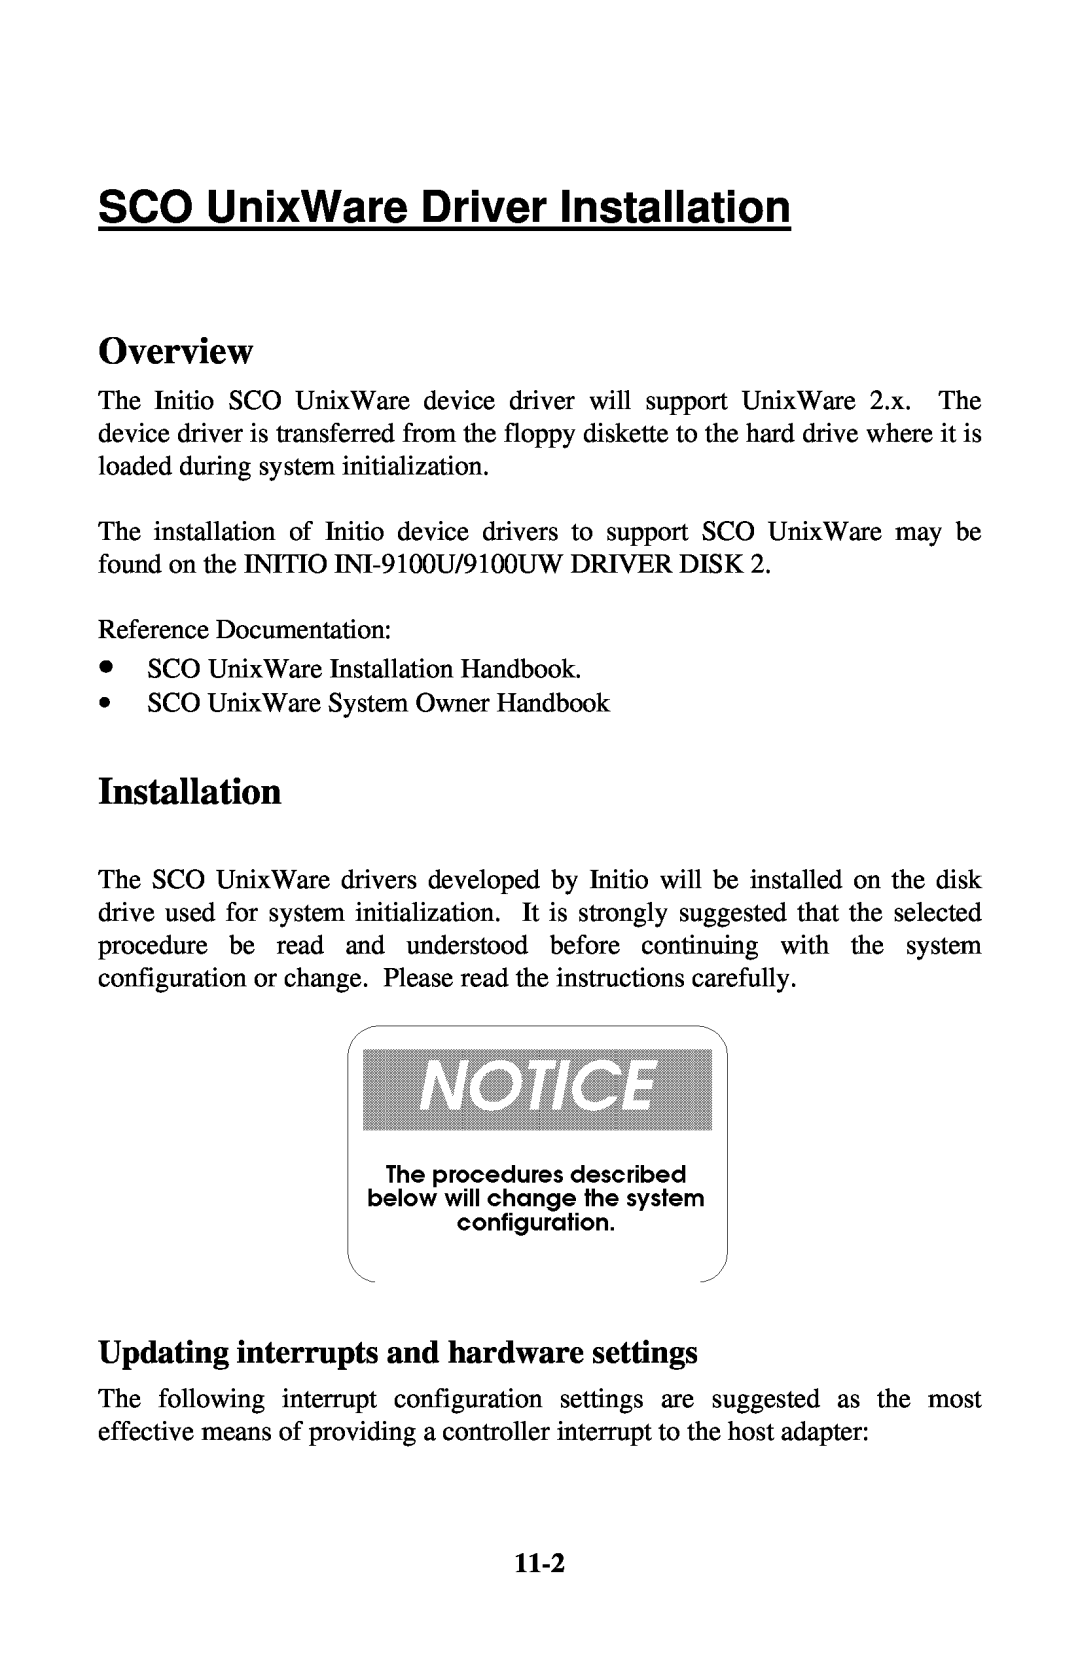 Initio INI-9100UW user manual SCO UnixWare Driver Installation, 11-2, Overview, Updating interrupts and hardware settings 